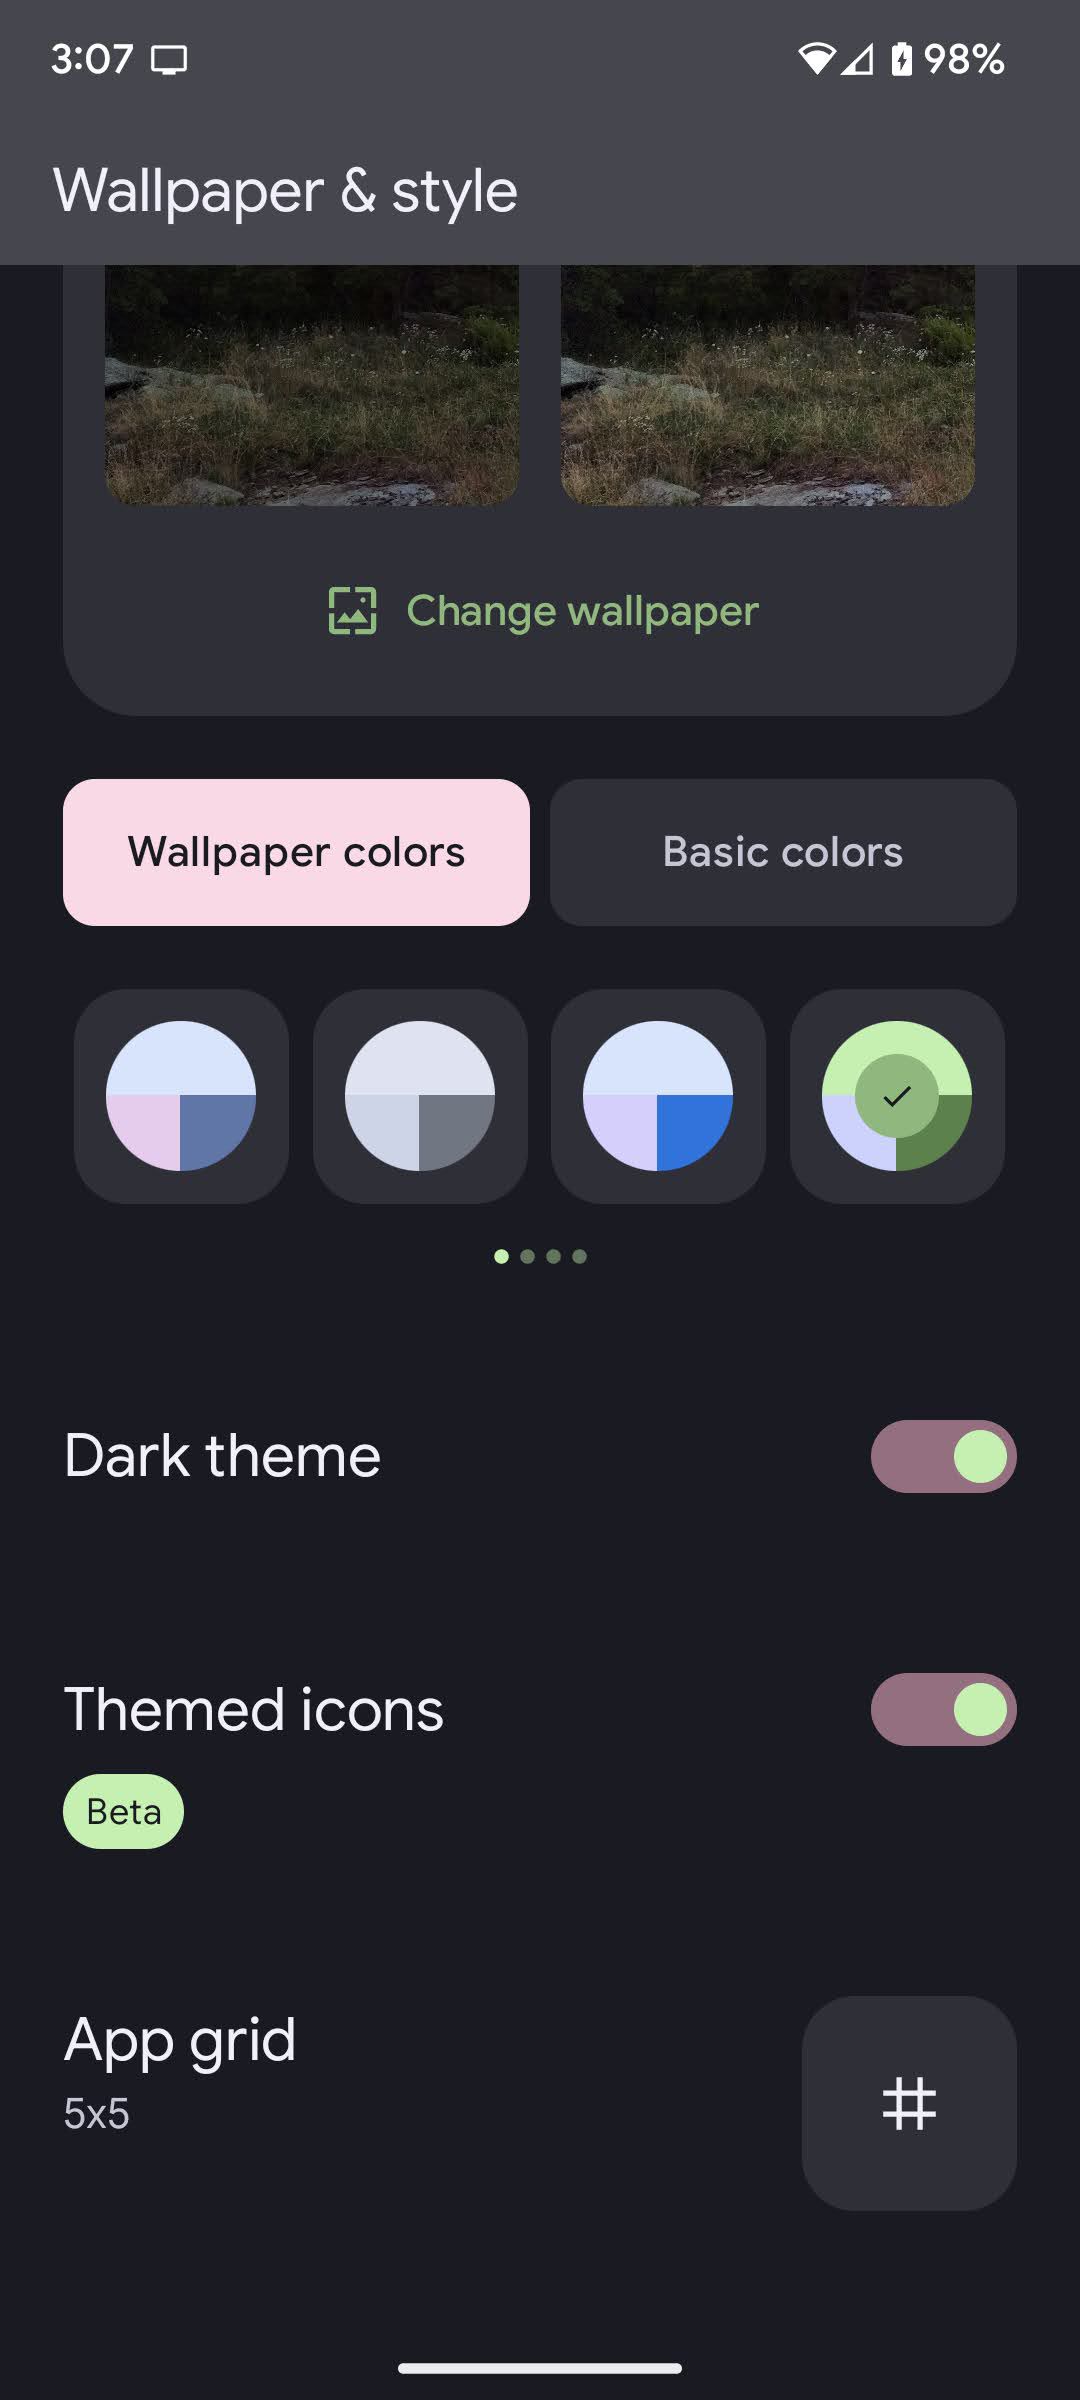 wallpaper &amp; style toggles